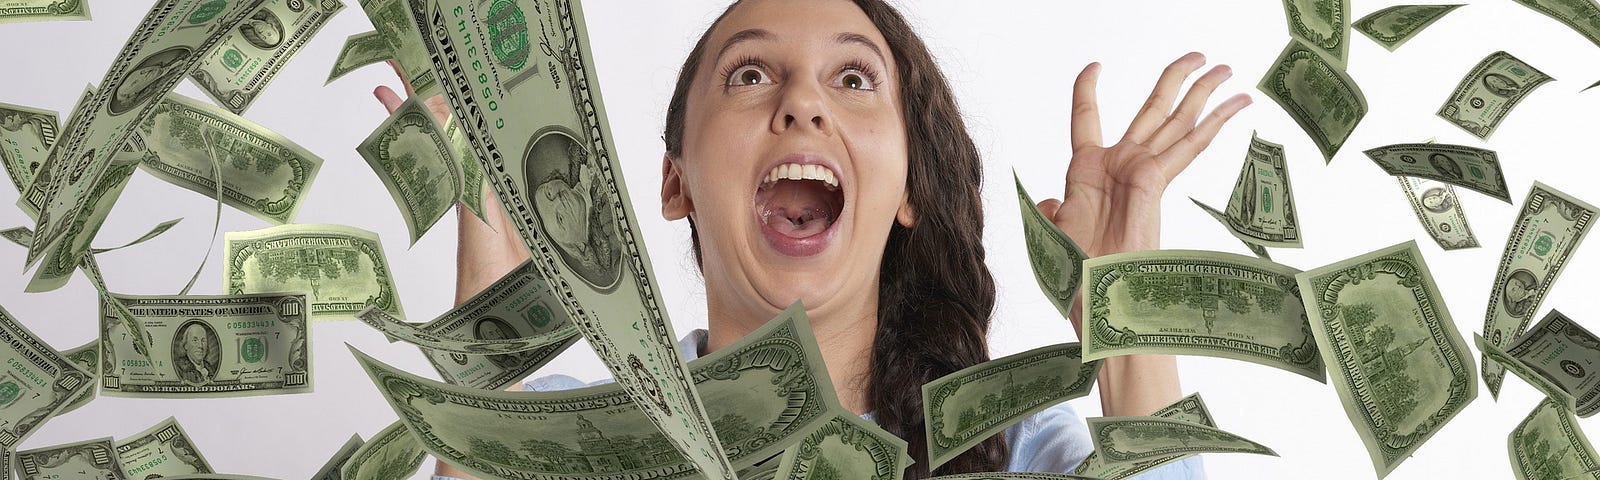 Image of excited woman yelling excitedly as money falls out of the sky